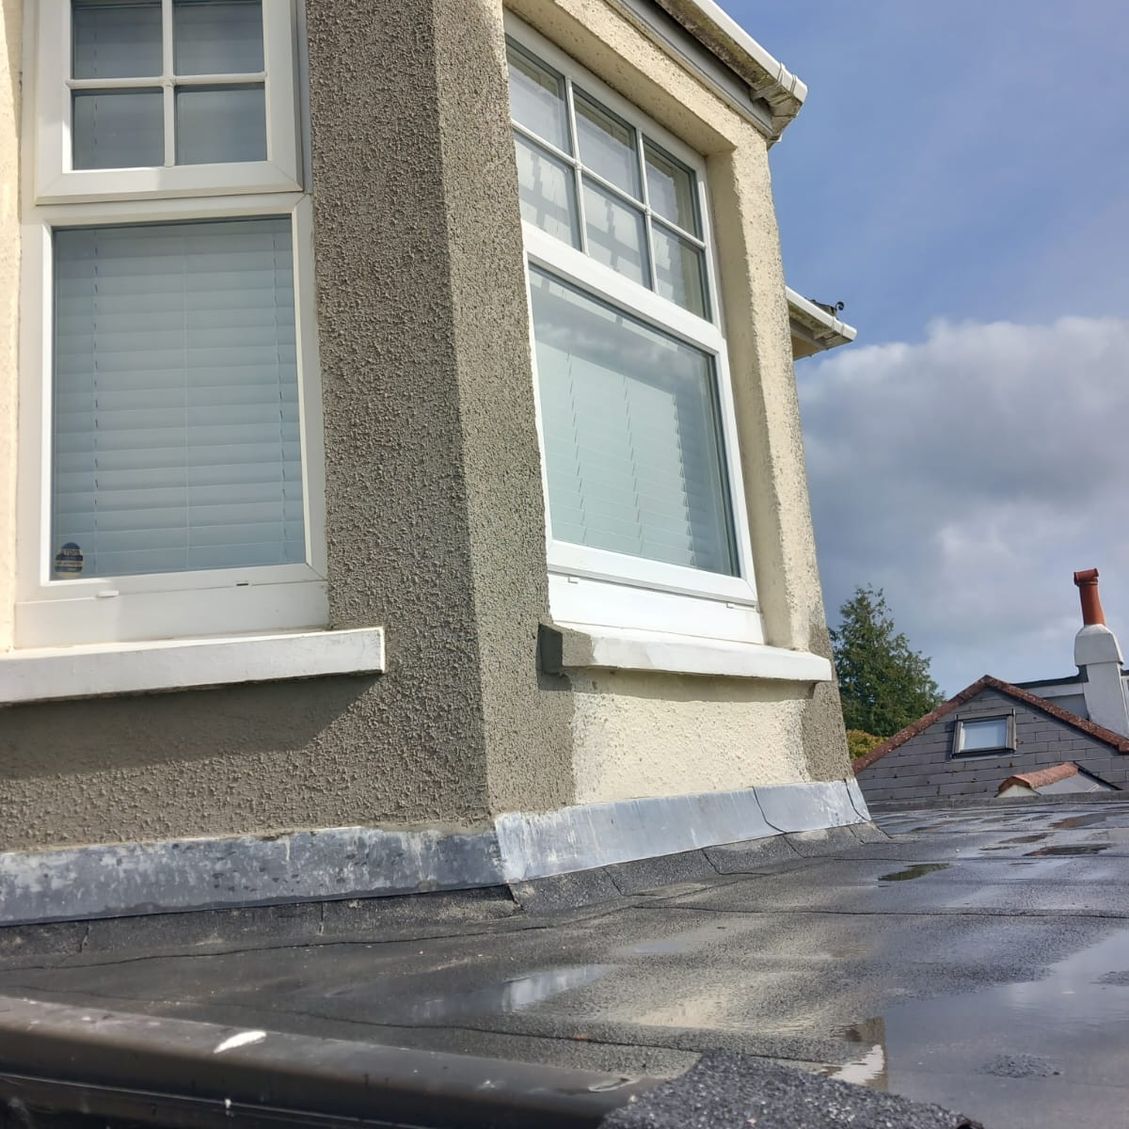 Lime render, smooth flat finish